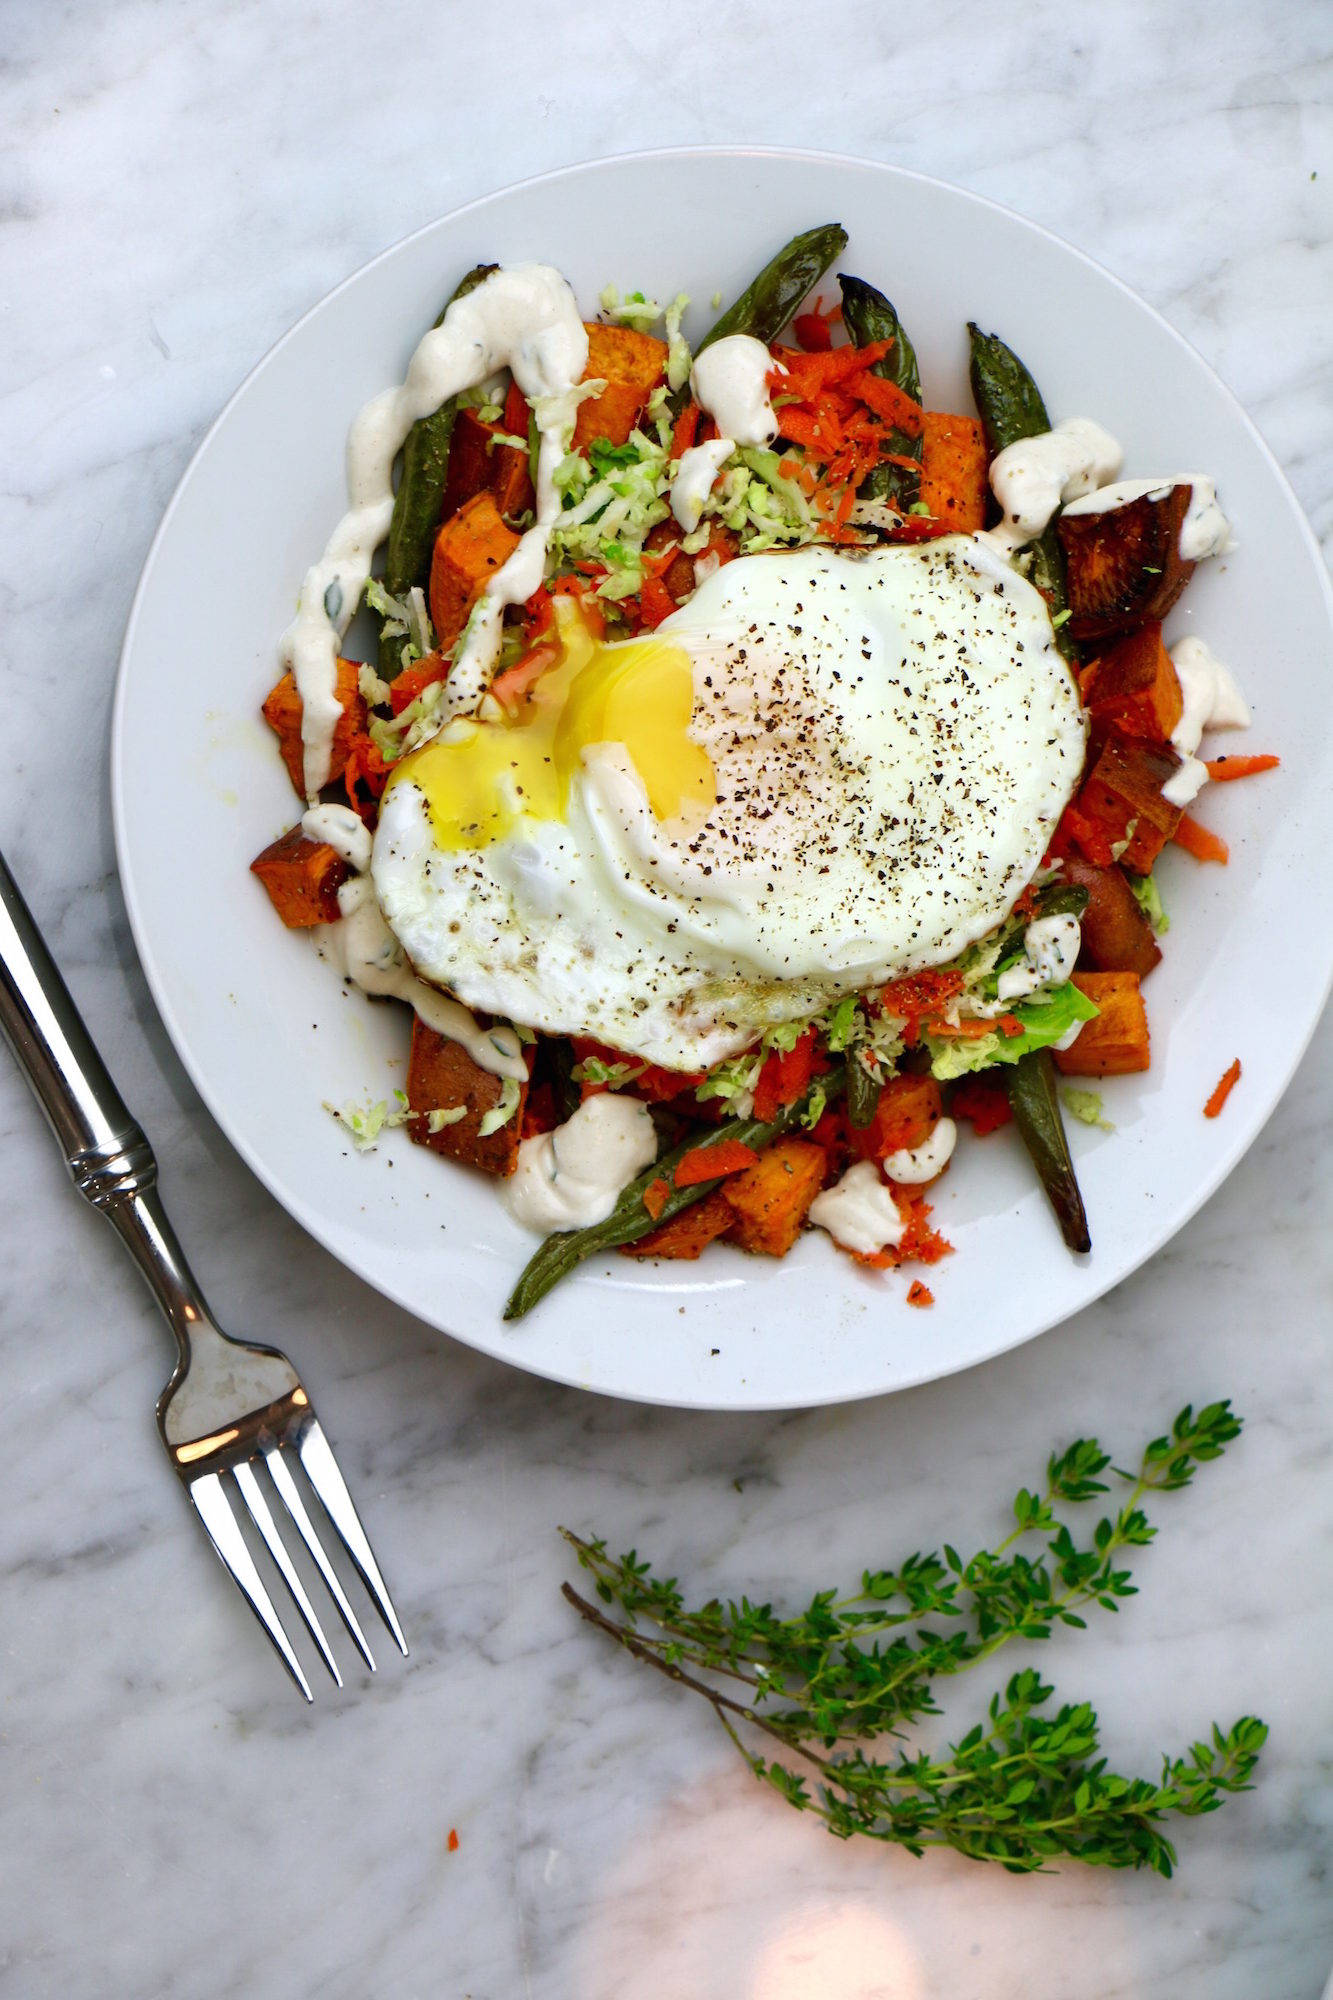 Buckwheat Breakfast Bowl with Savory Roasted Veggies, a Garlic Lemon Tahini Sauce, and a Fried Egg on top! This bowl is healthy, gluten-free, and vegetarian. Make it vegan by removing the egg.